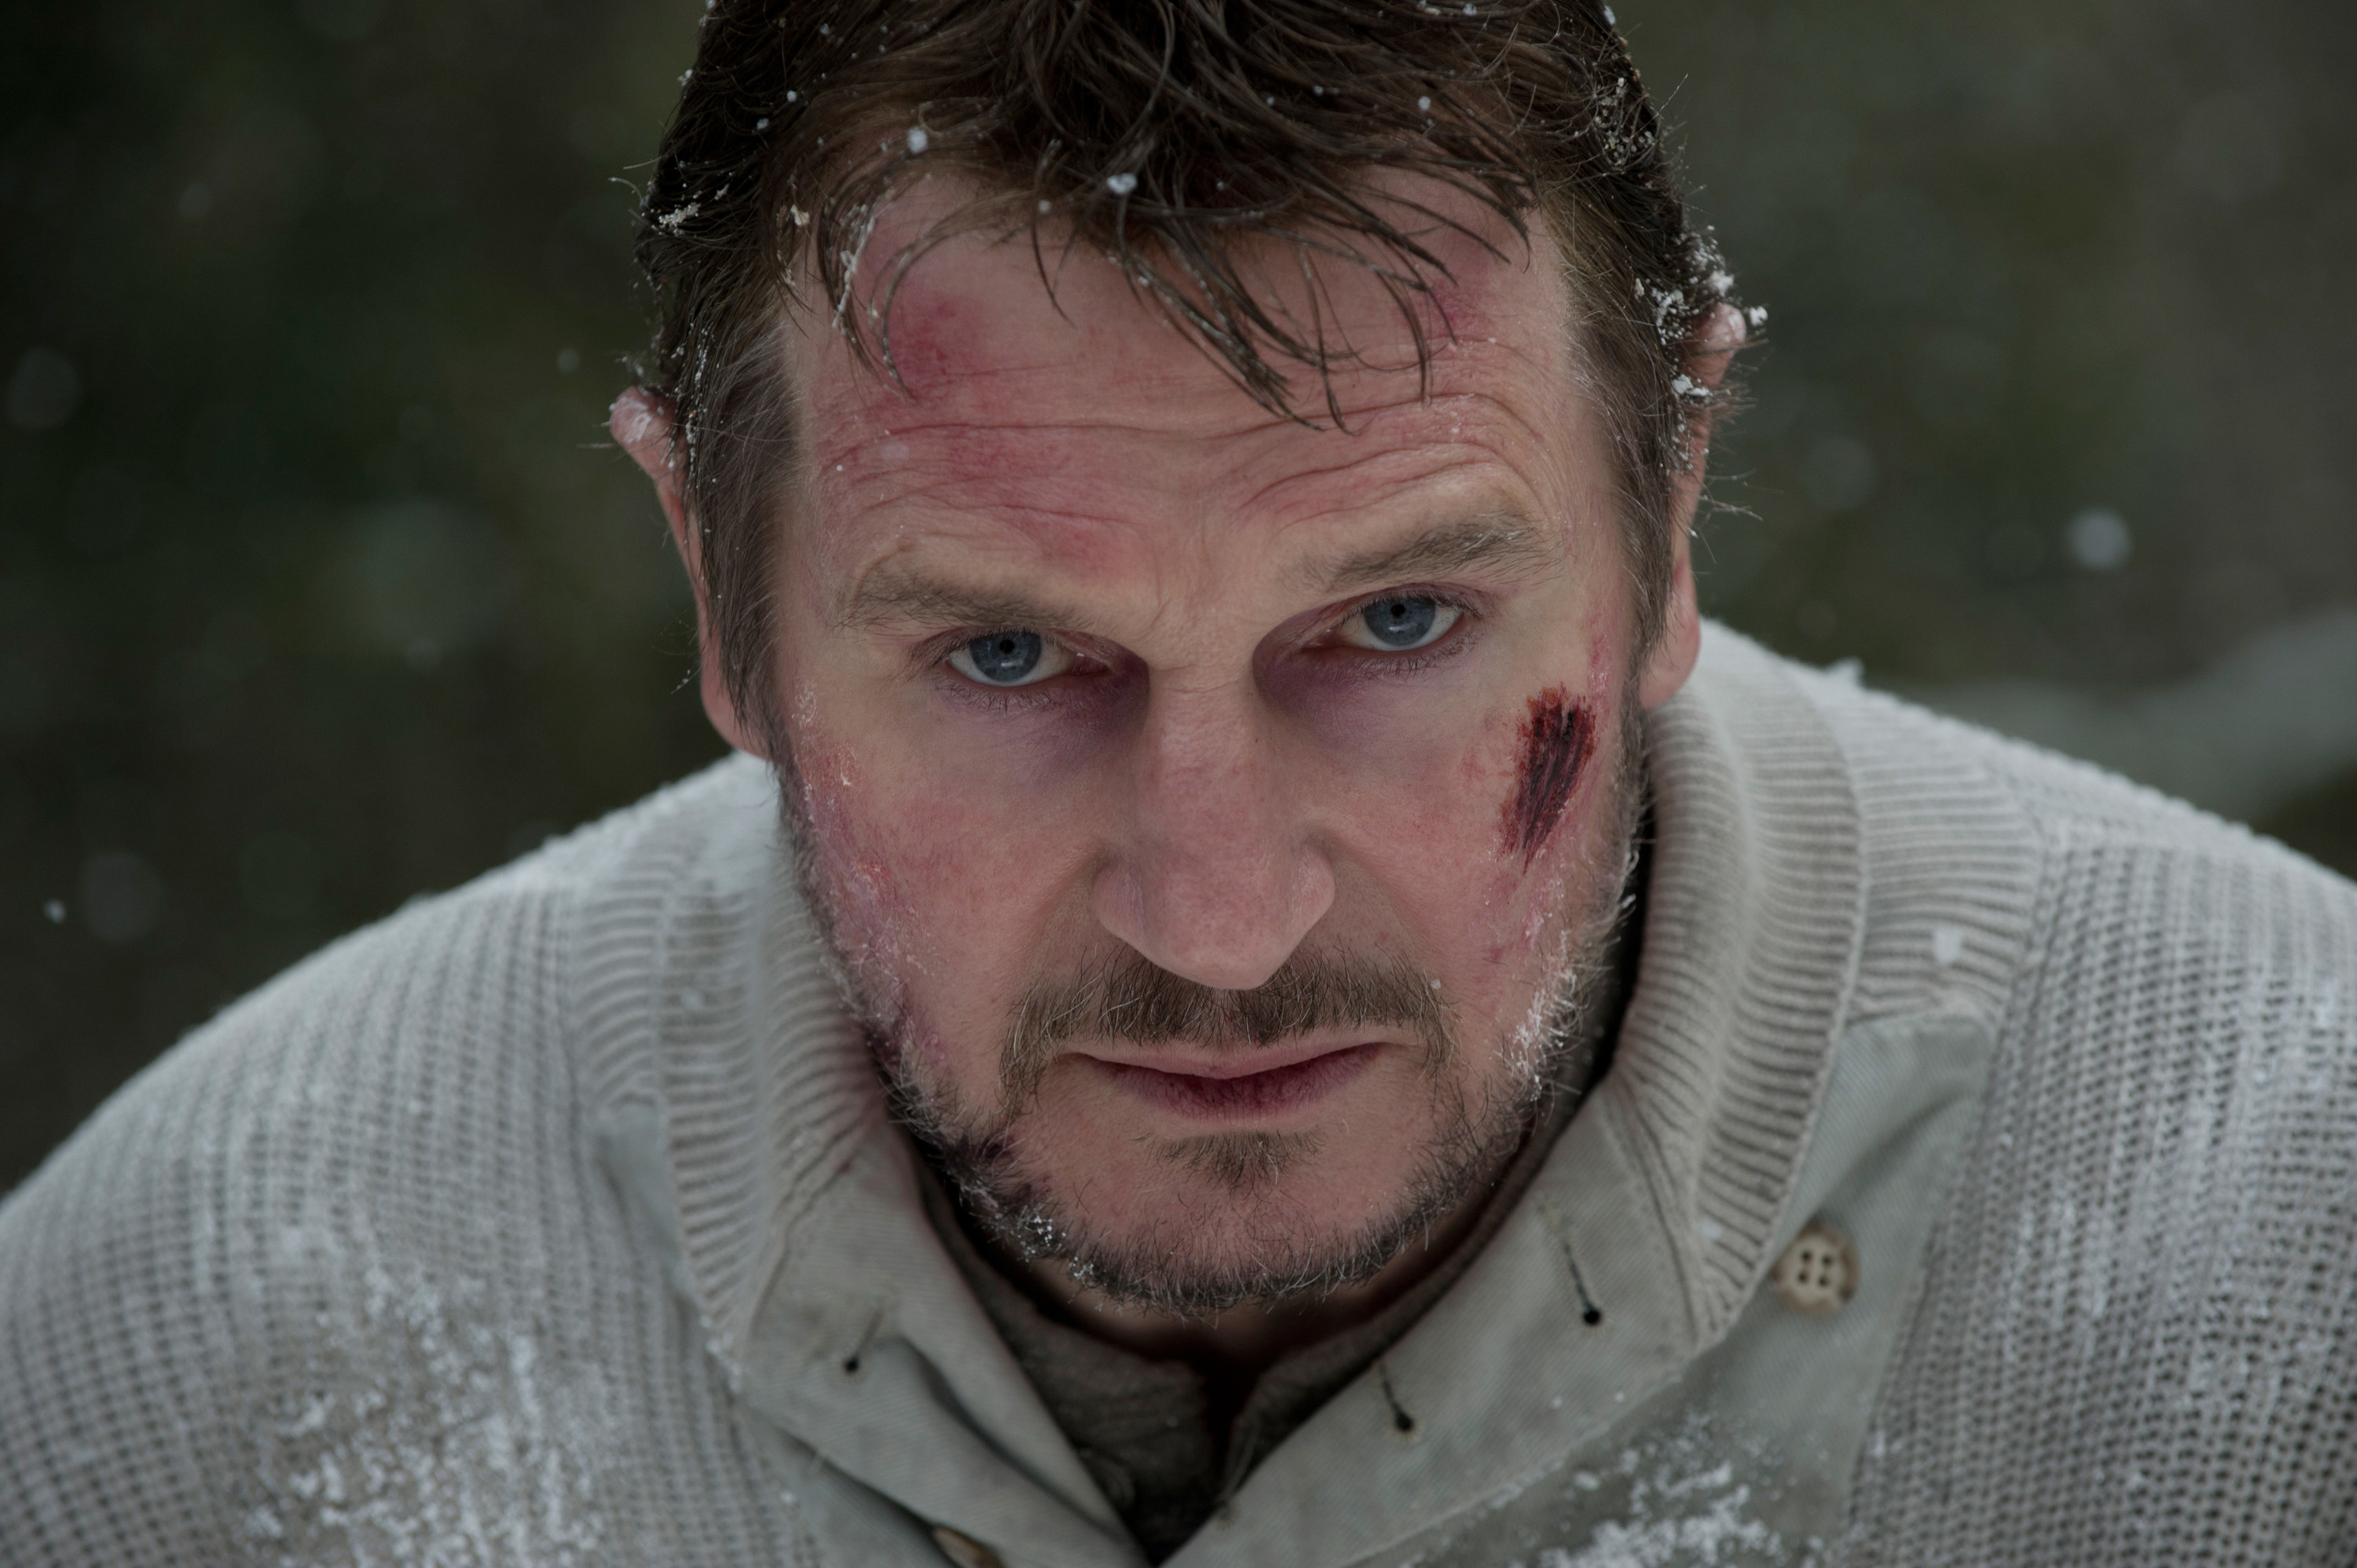 Liam Neeson looking beat up and intense, standing out in the snow